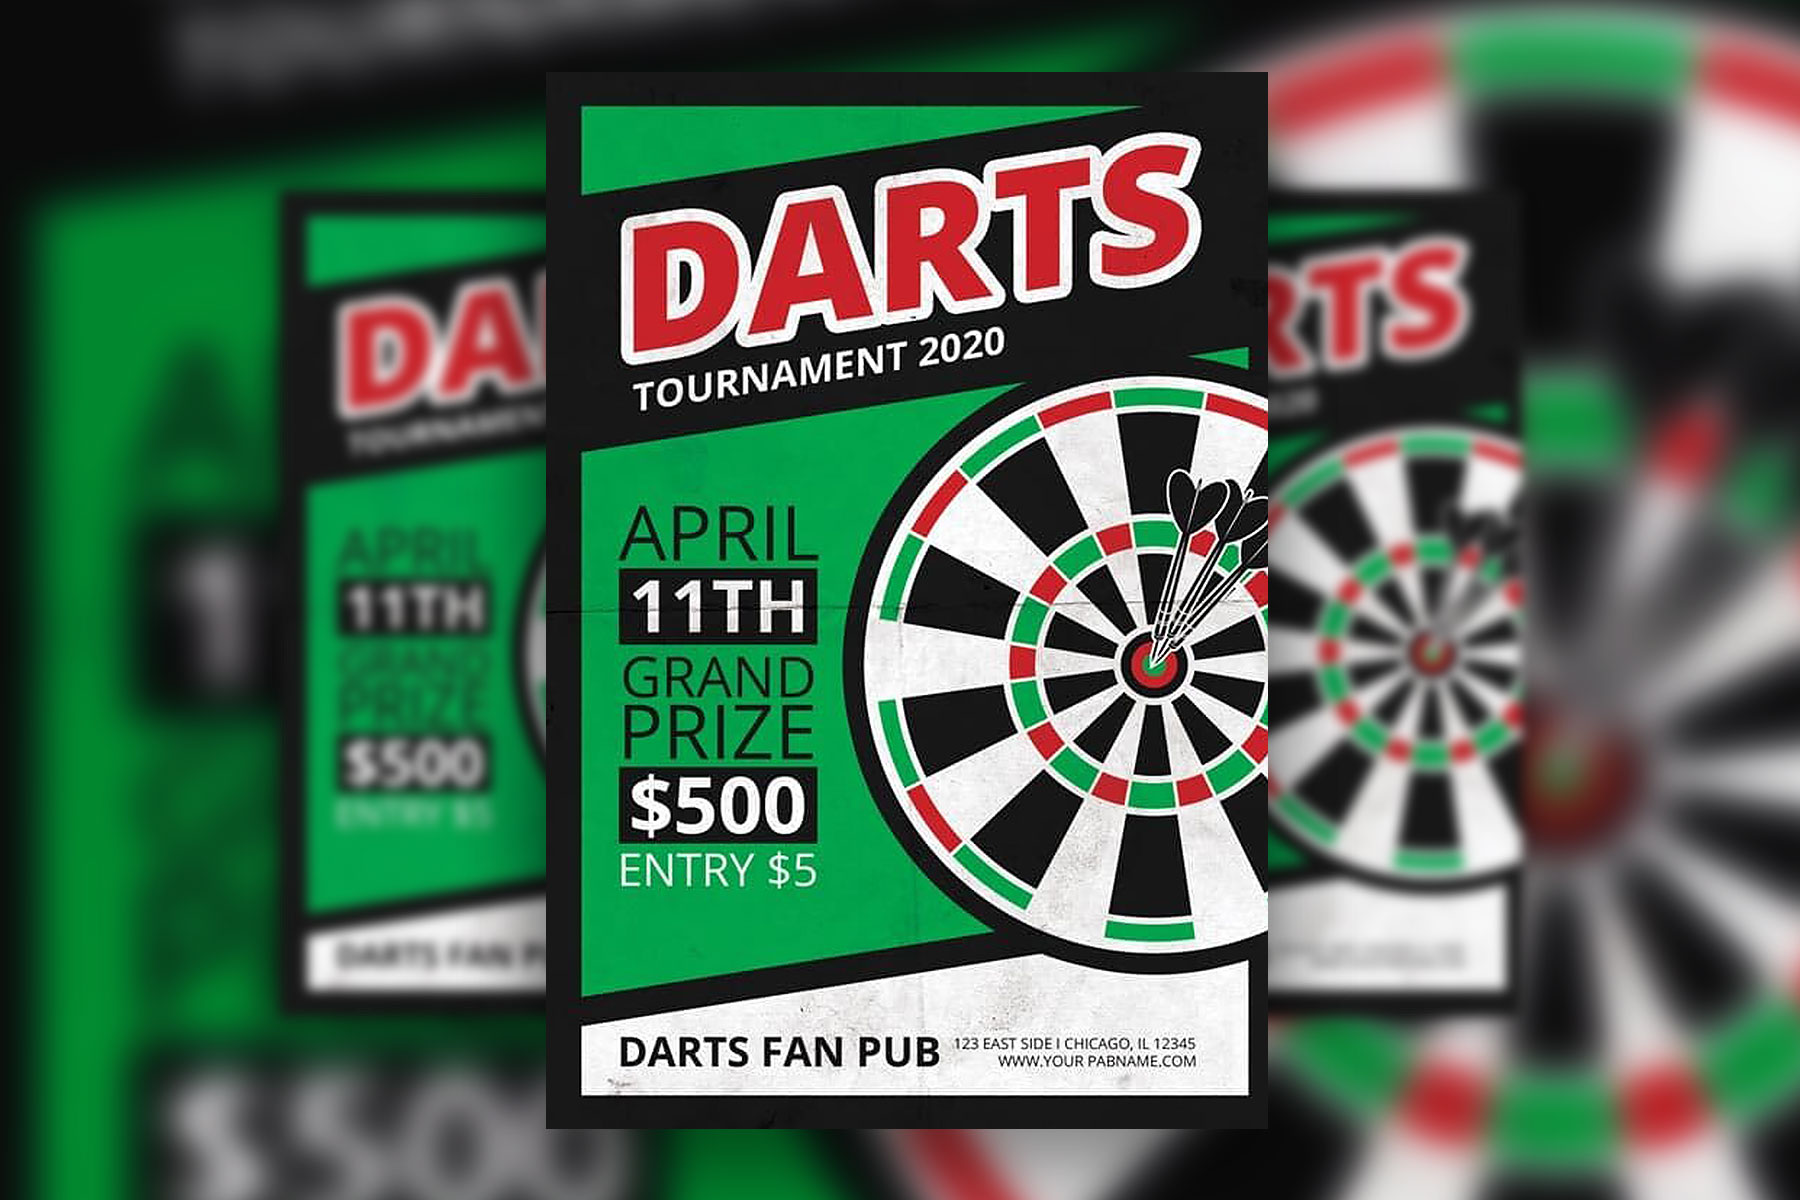 Darts Tournament Flyer Template with Green and Black Theme (FREE